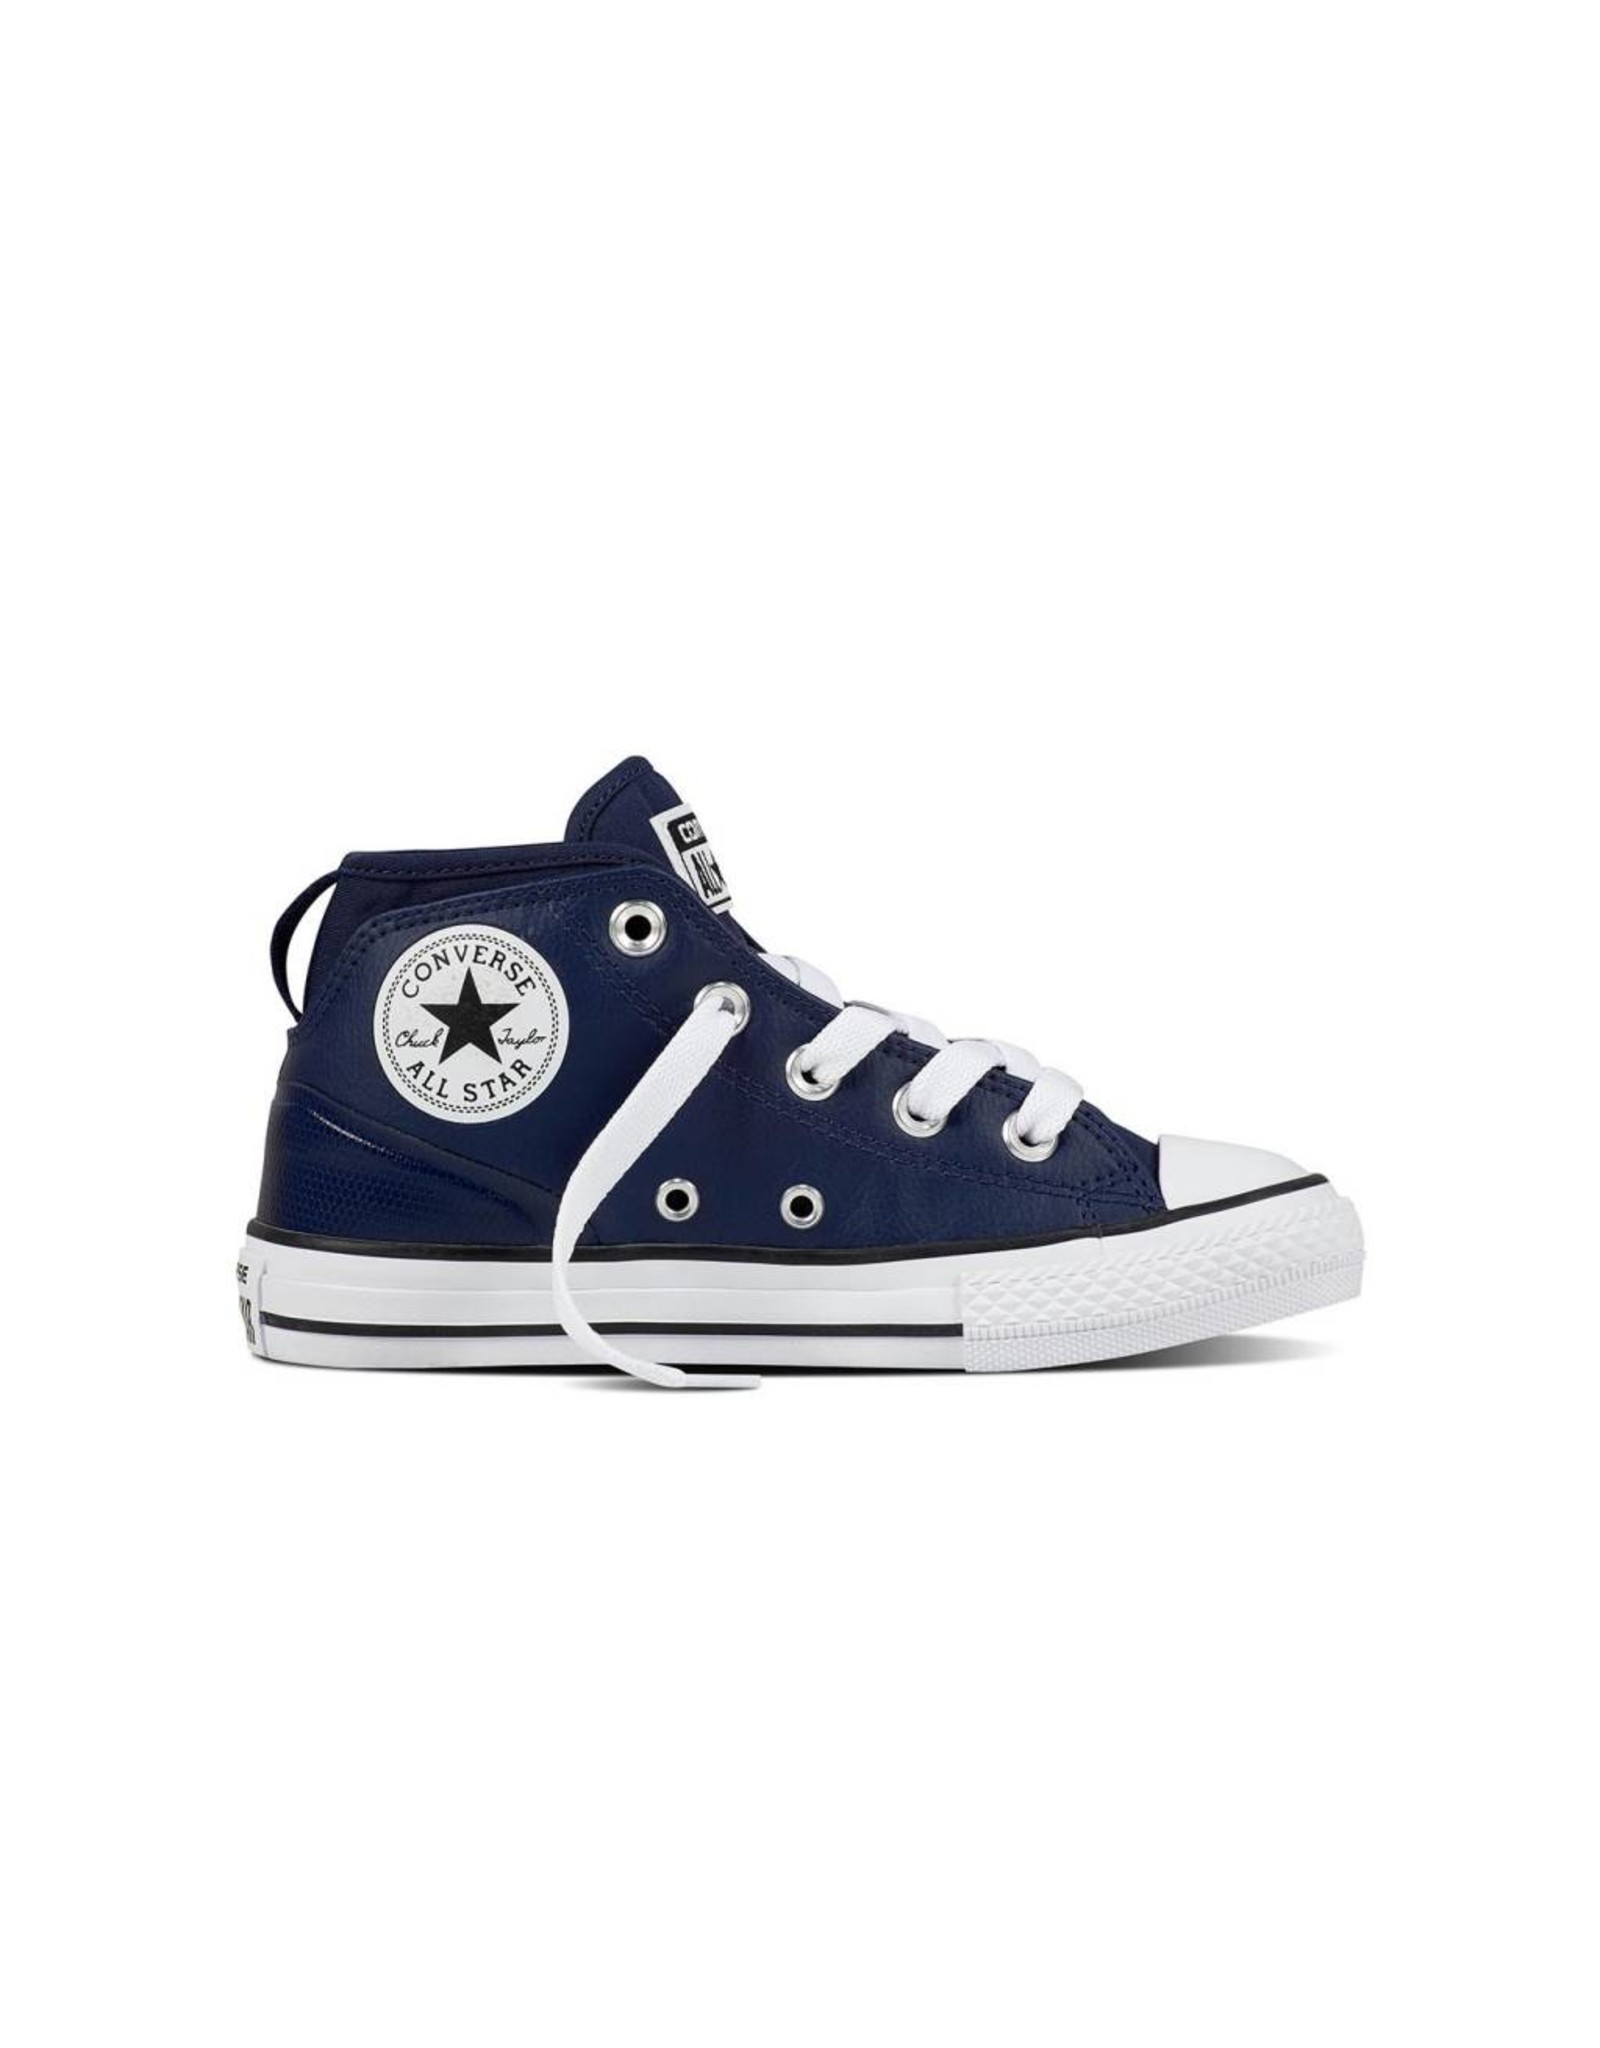 CHUCK TAYLOR SYDE STREET MID LEATHER MIDNIGHT NAVY CCW96N-657539C